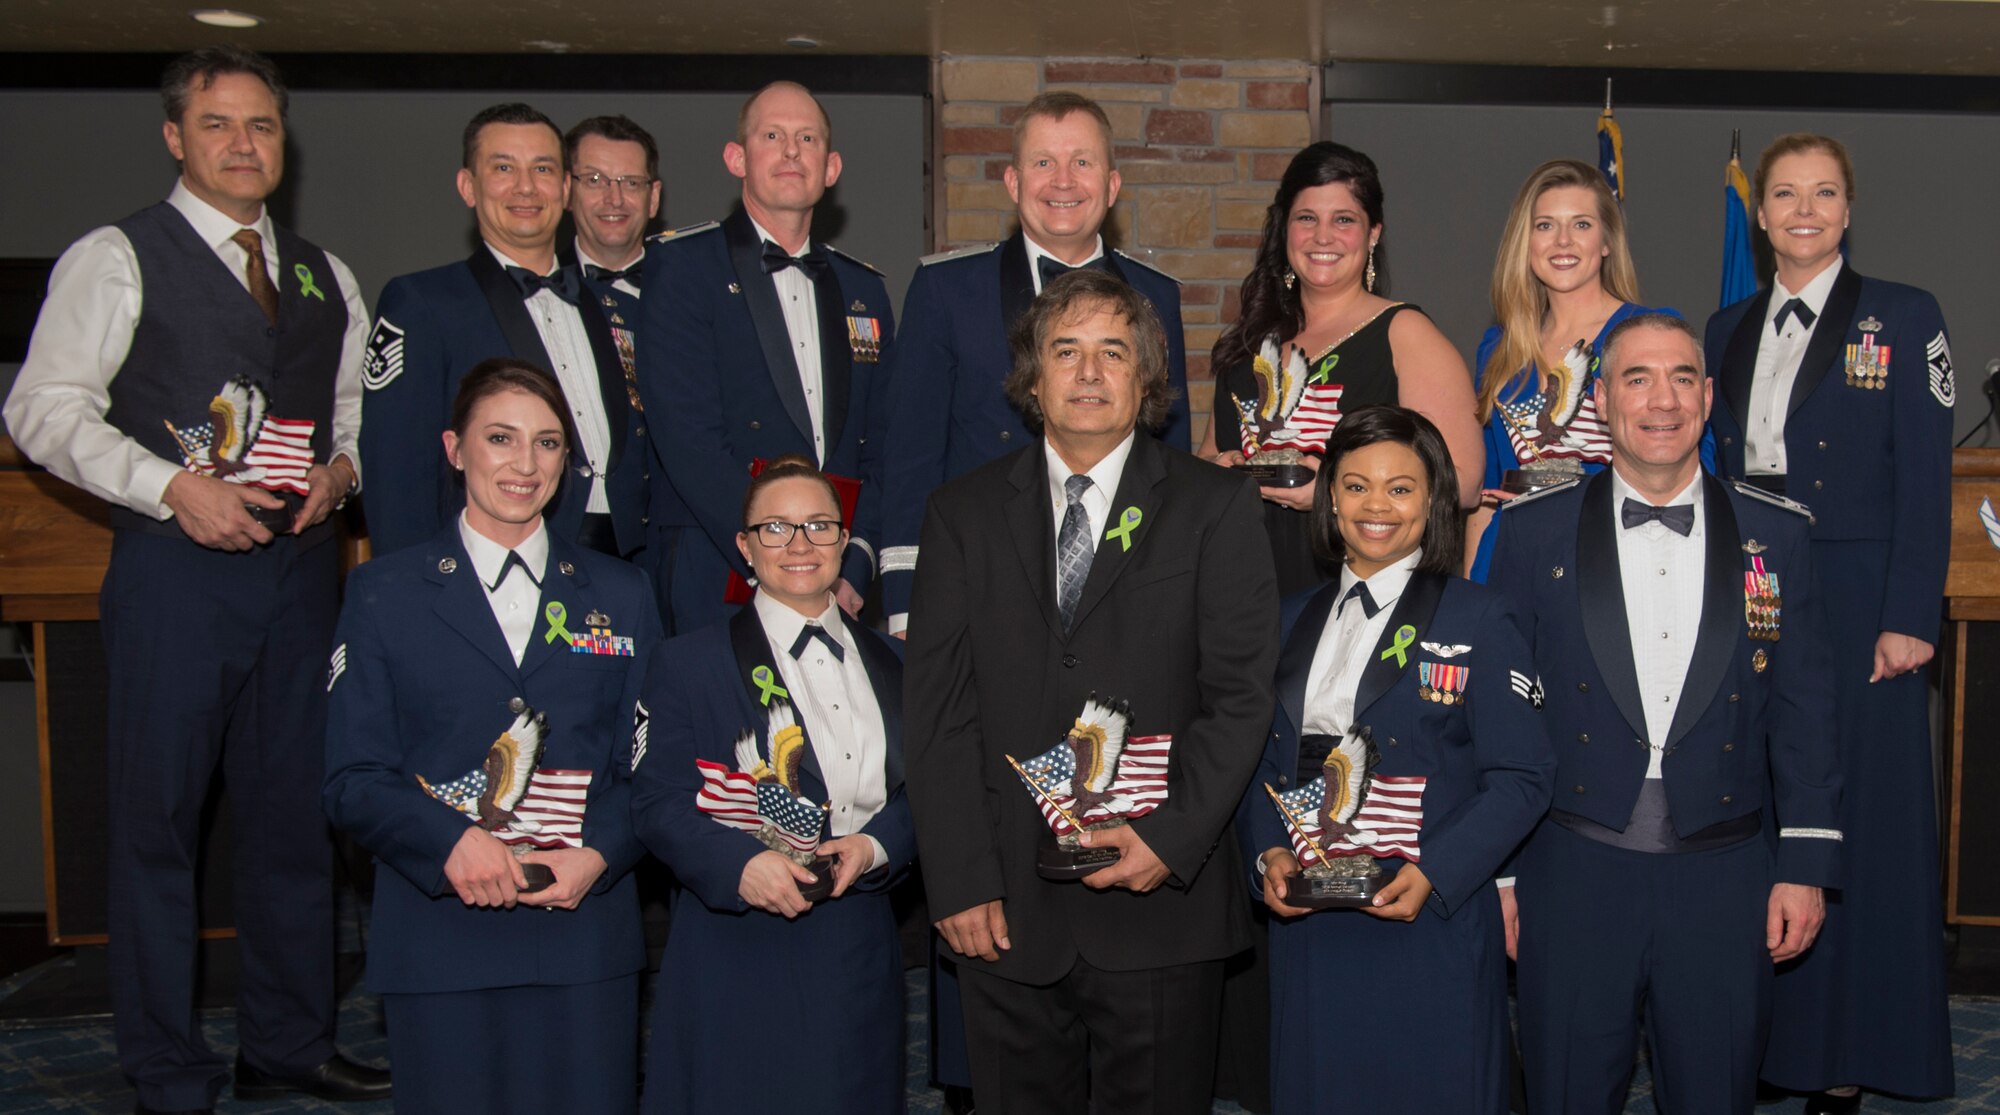 2018 annual award winners pose for a photo, Feb. 9, 2019, on Holloman Air Force Base, N.M. During the banquet, 14 Holloman Airmen received awards for their outstanding performance throughout the year. (U.S. Air Force photo by Airman Quion Lowe)